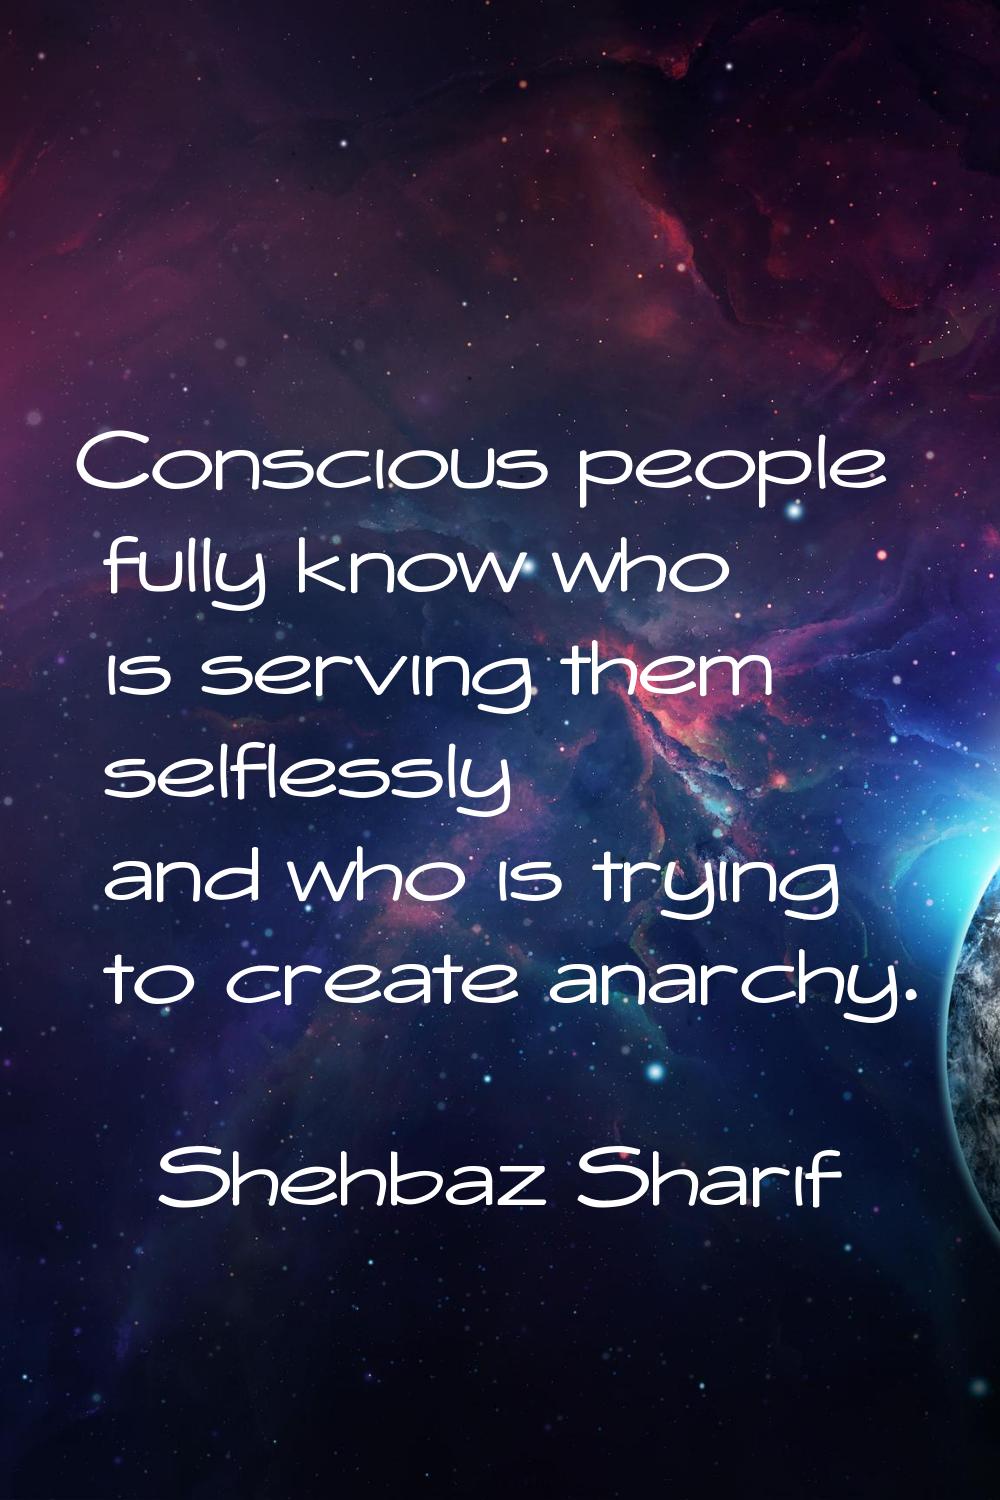 Conscious people fully know who is serving them selflessly and who is trying to create anarchy.